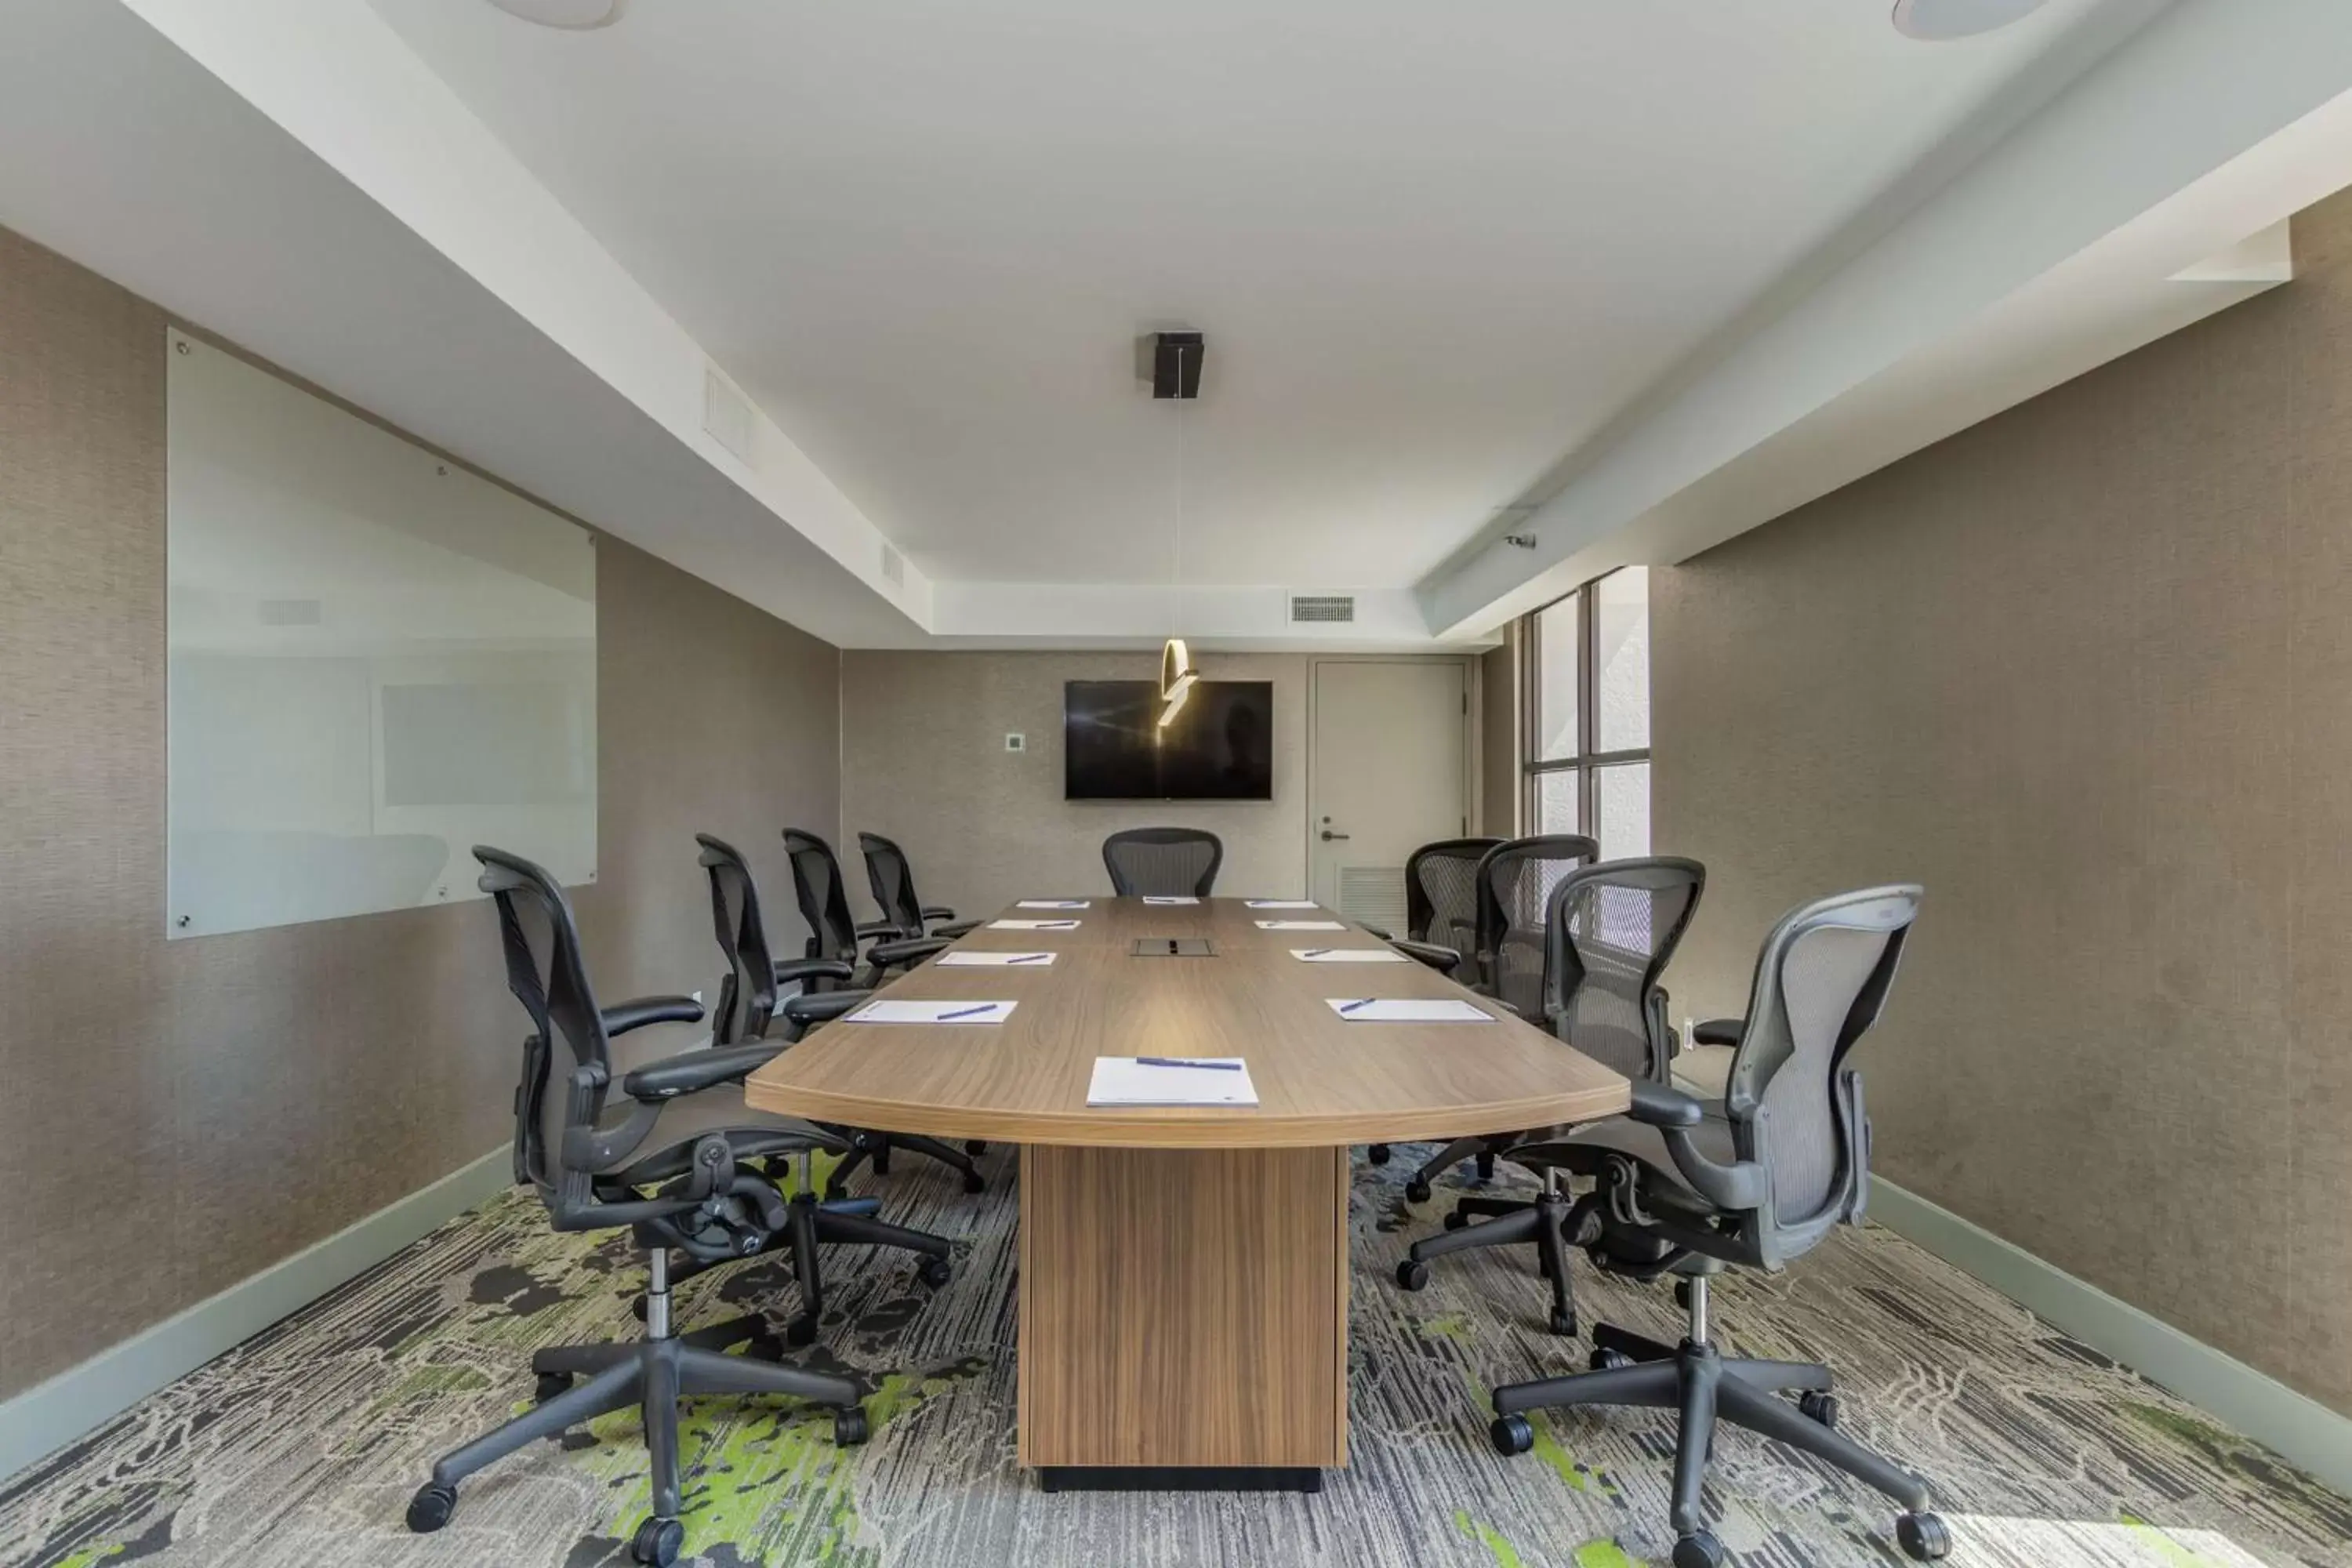 Meeting/conference room in DoubleTree by Hilton Chandler Phoenix, AZ